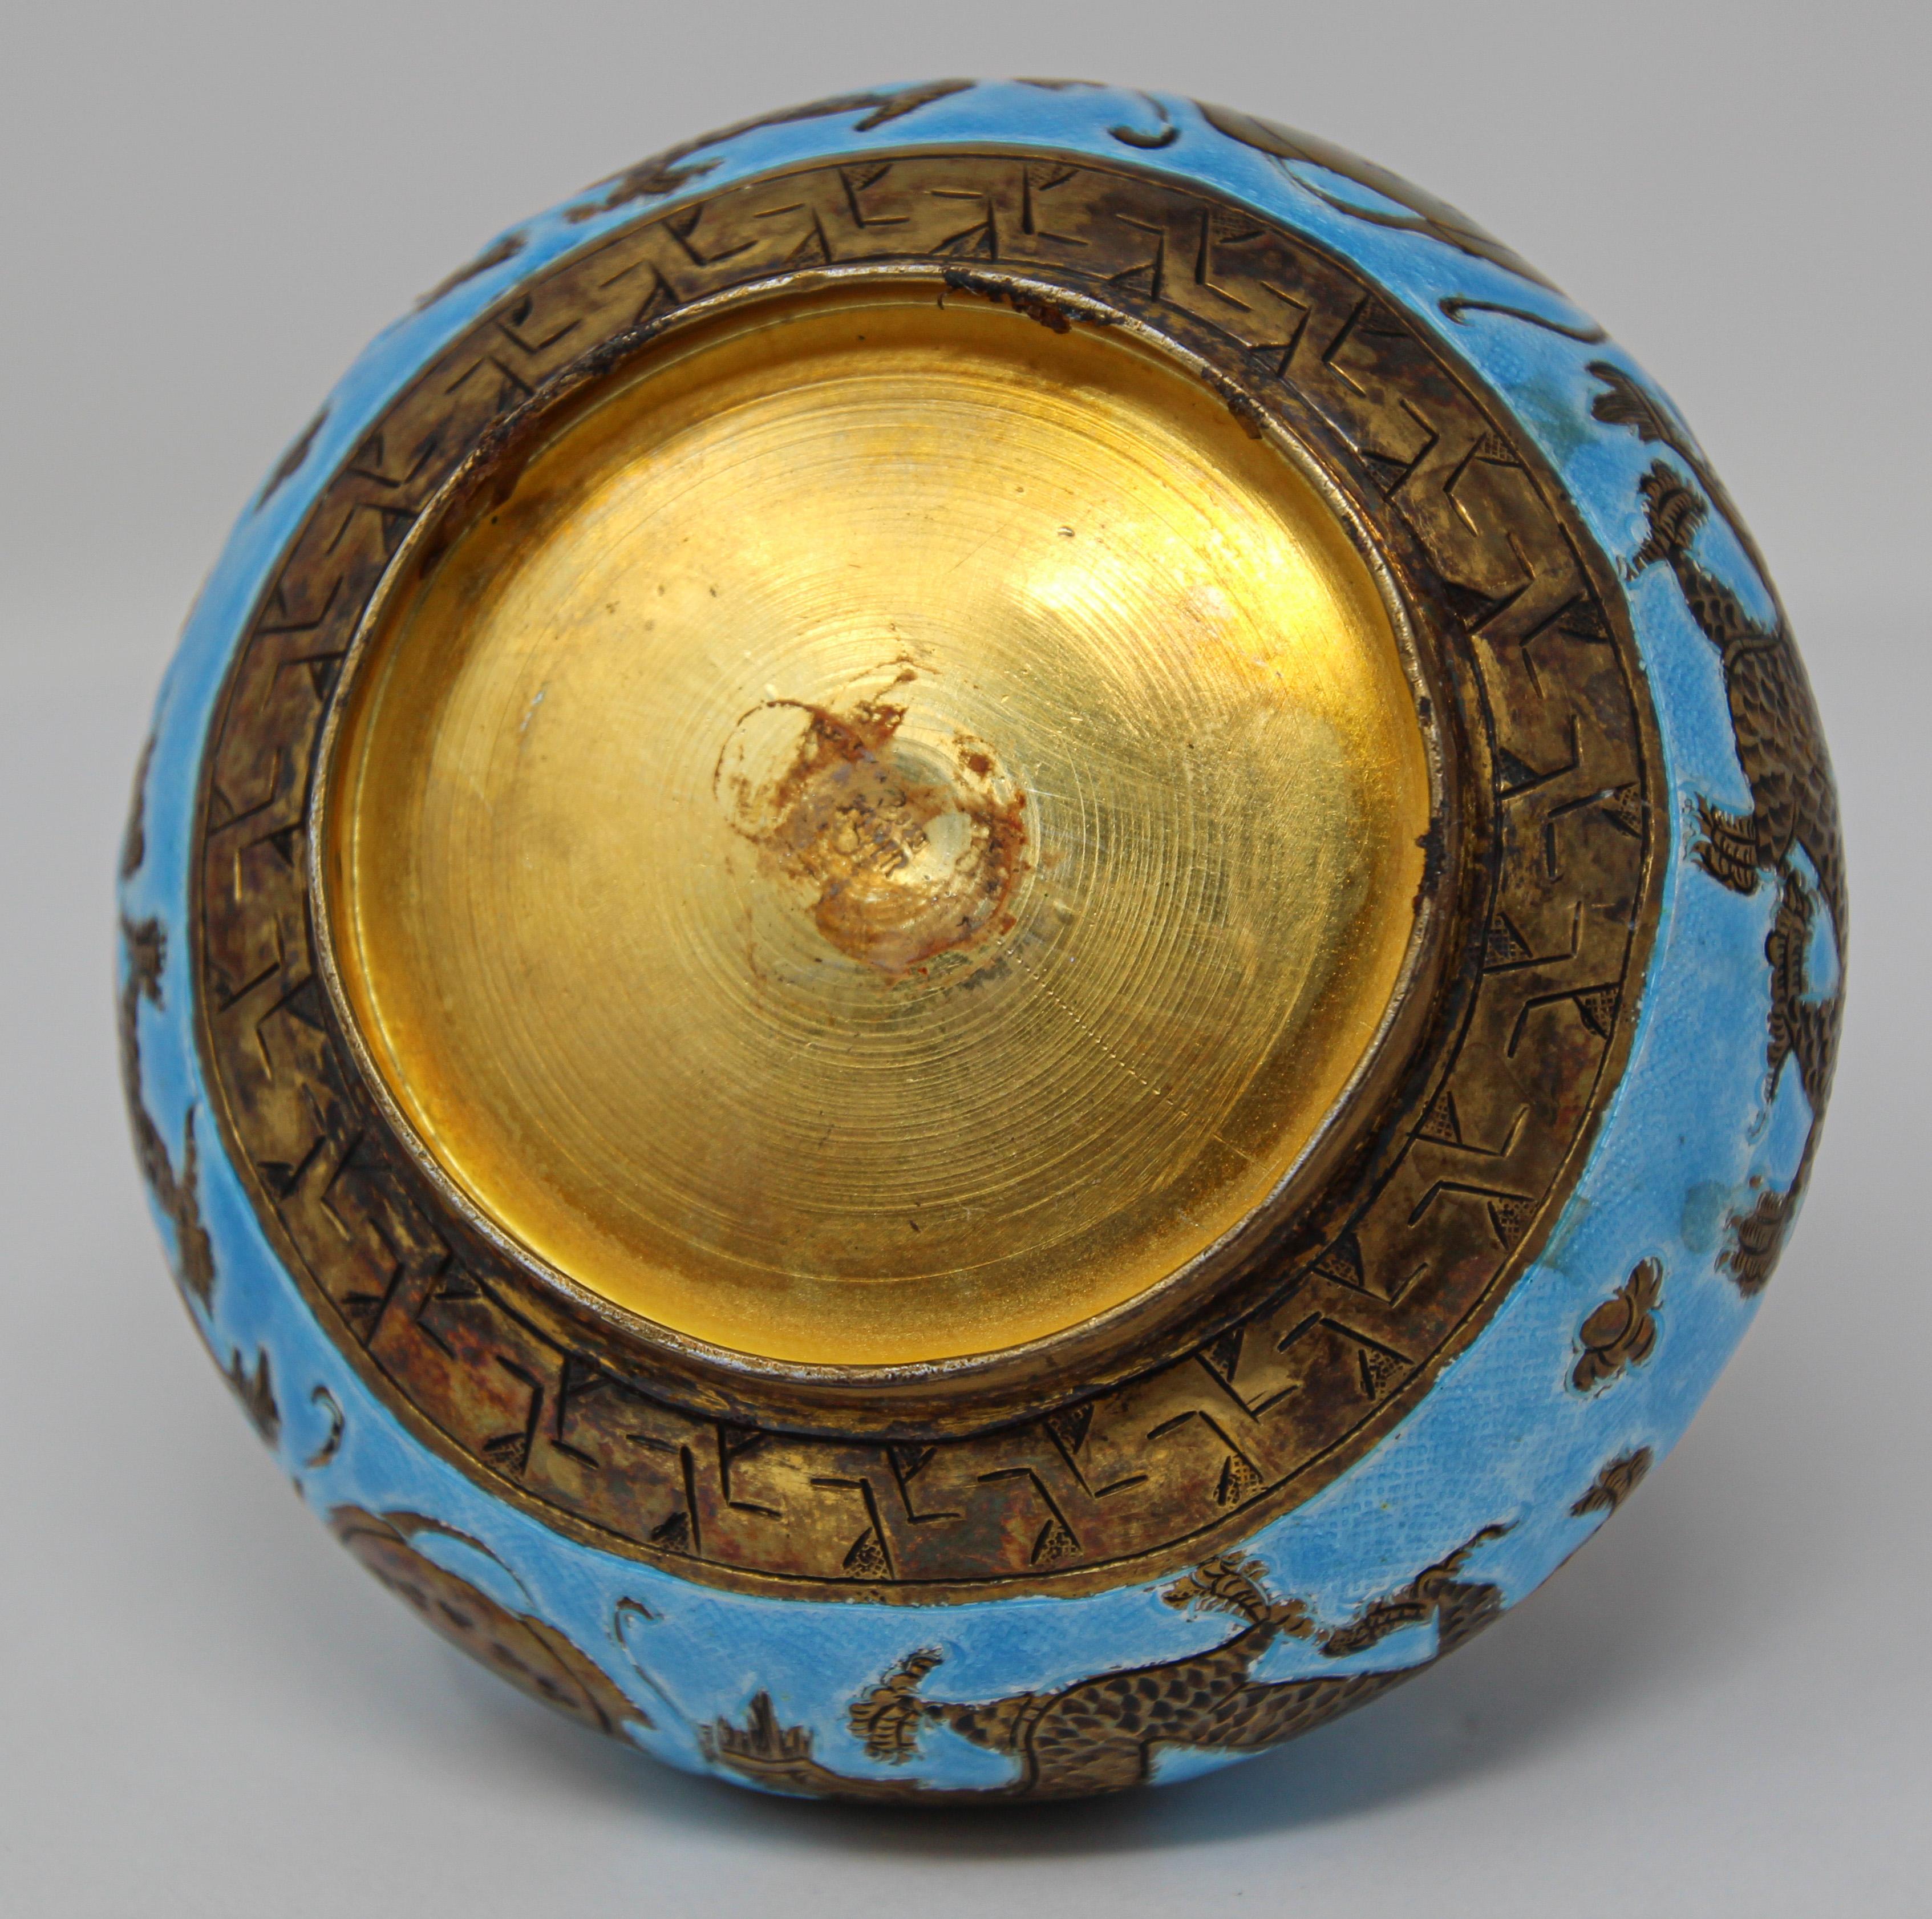 Chinese Export Brass Snuff Box with Turquoise Enamel Dragons and Beads Inlaid 1